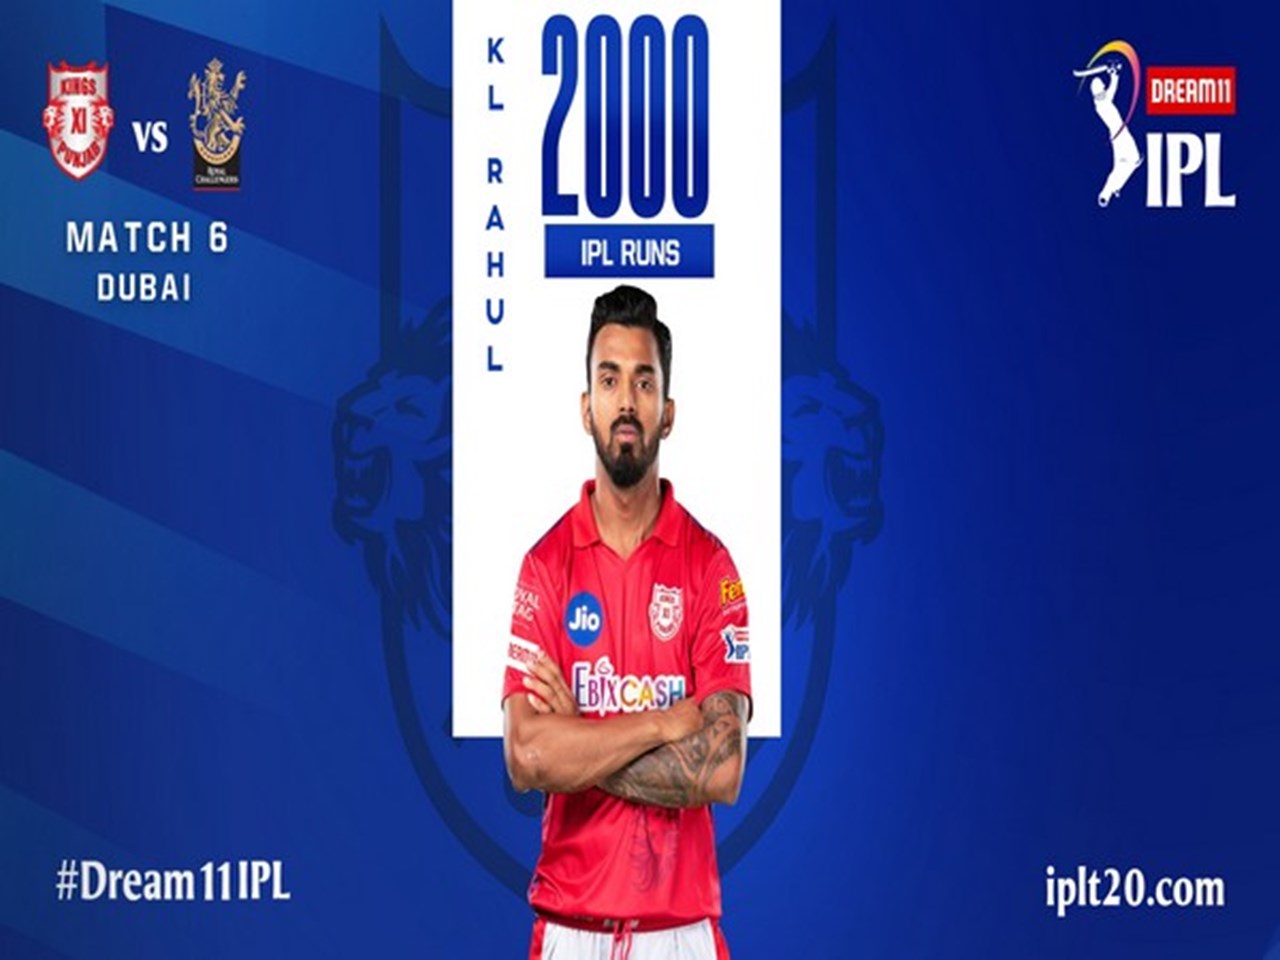 Ipl 13 Kl Rahul Becomes Fastest Indian To Score 2 000 Runs Sports Games